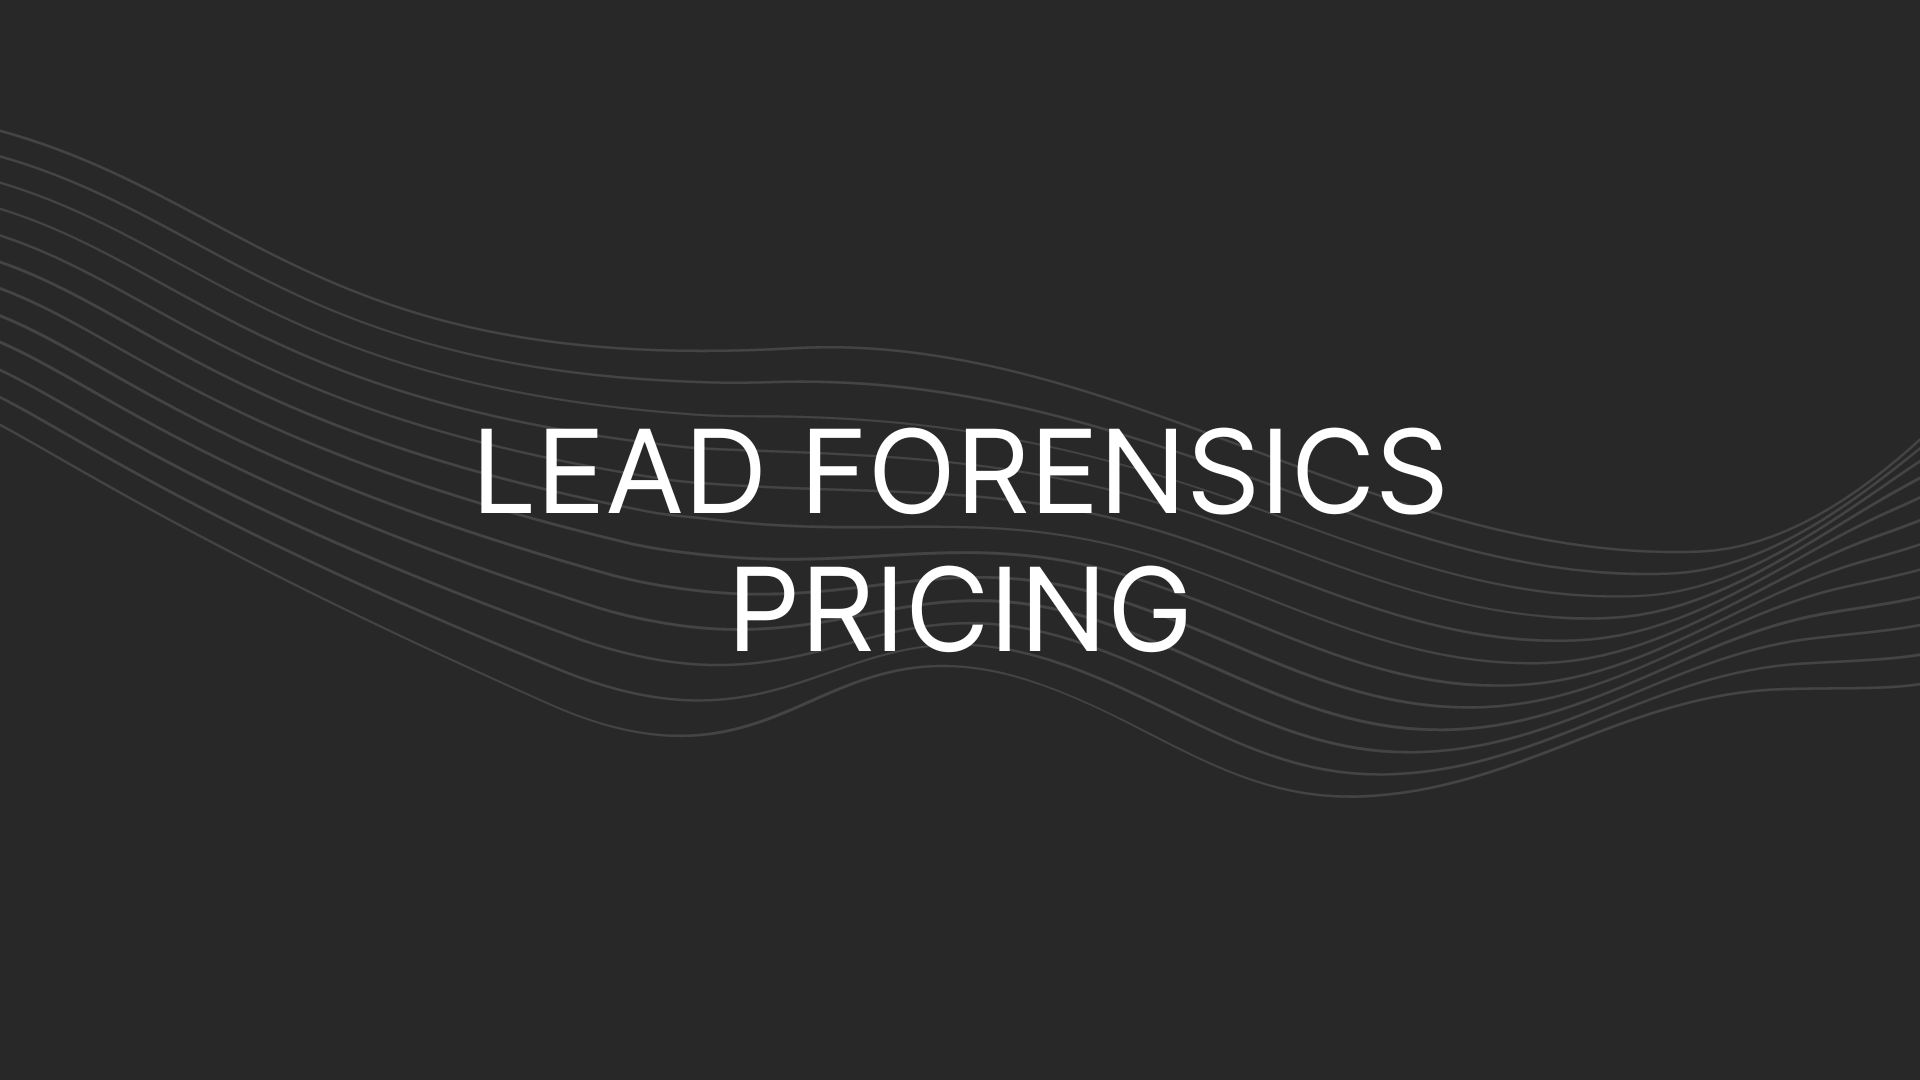 Lead Forensics Pricing – Actual Prices for All Plans